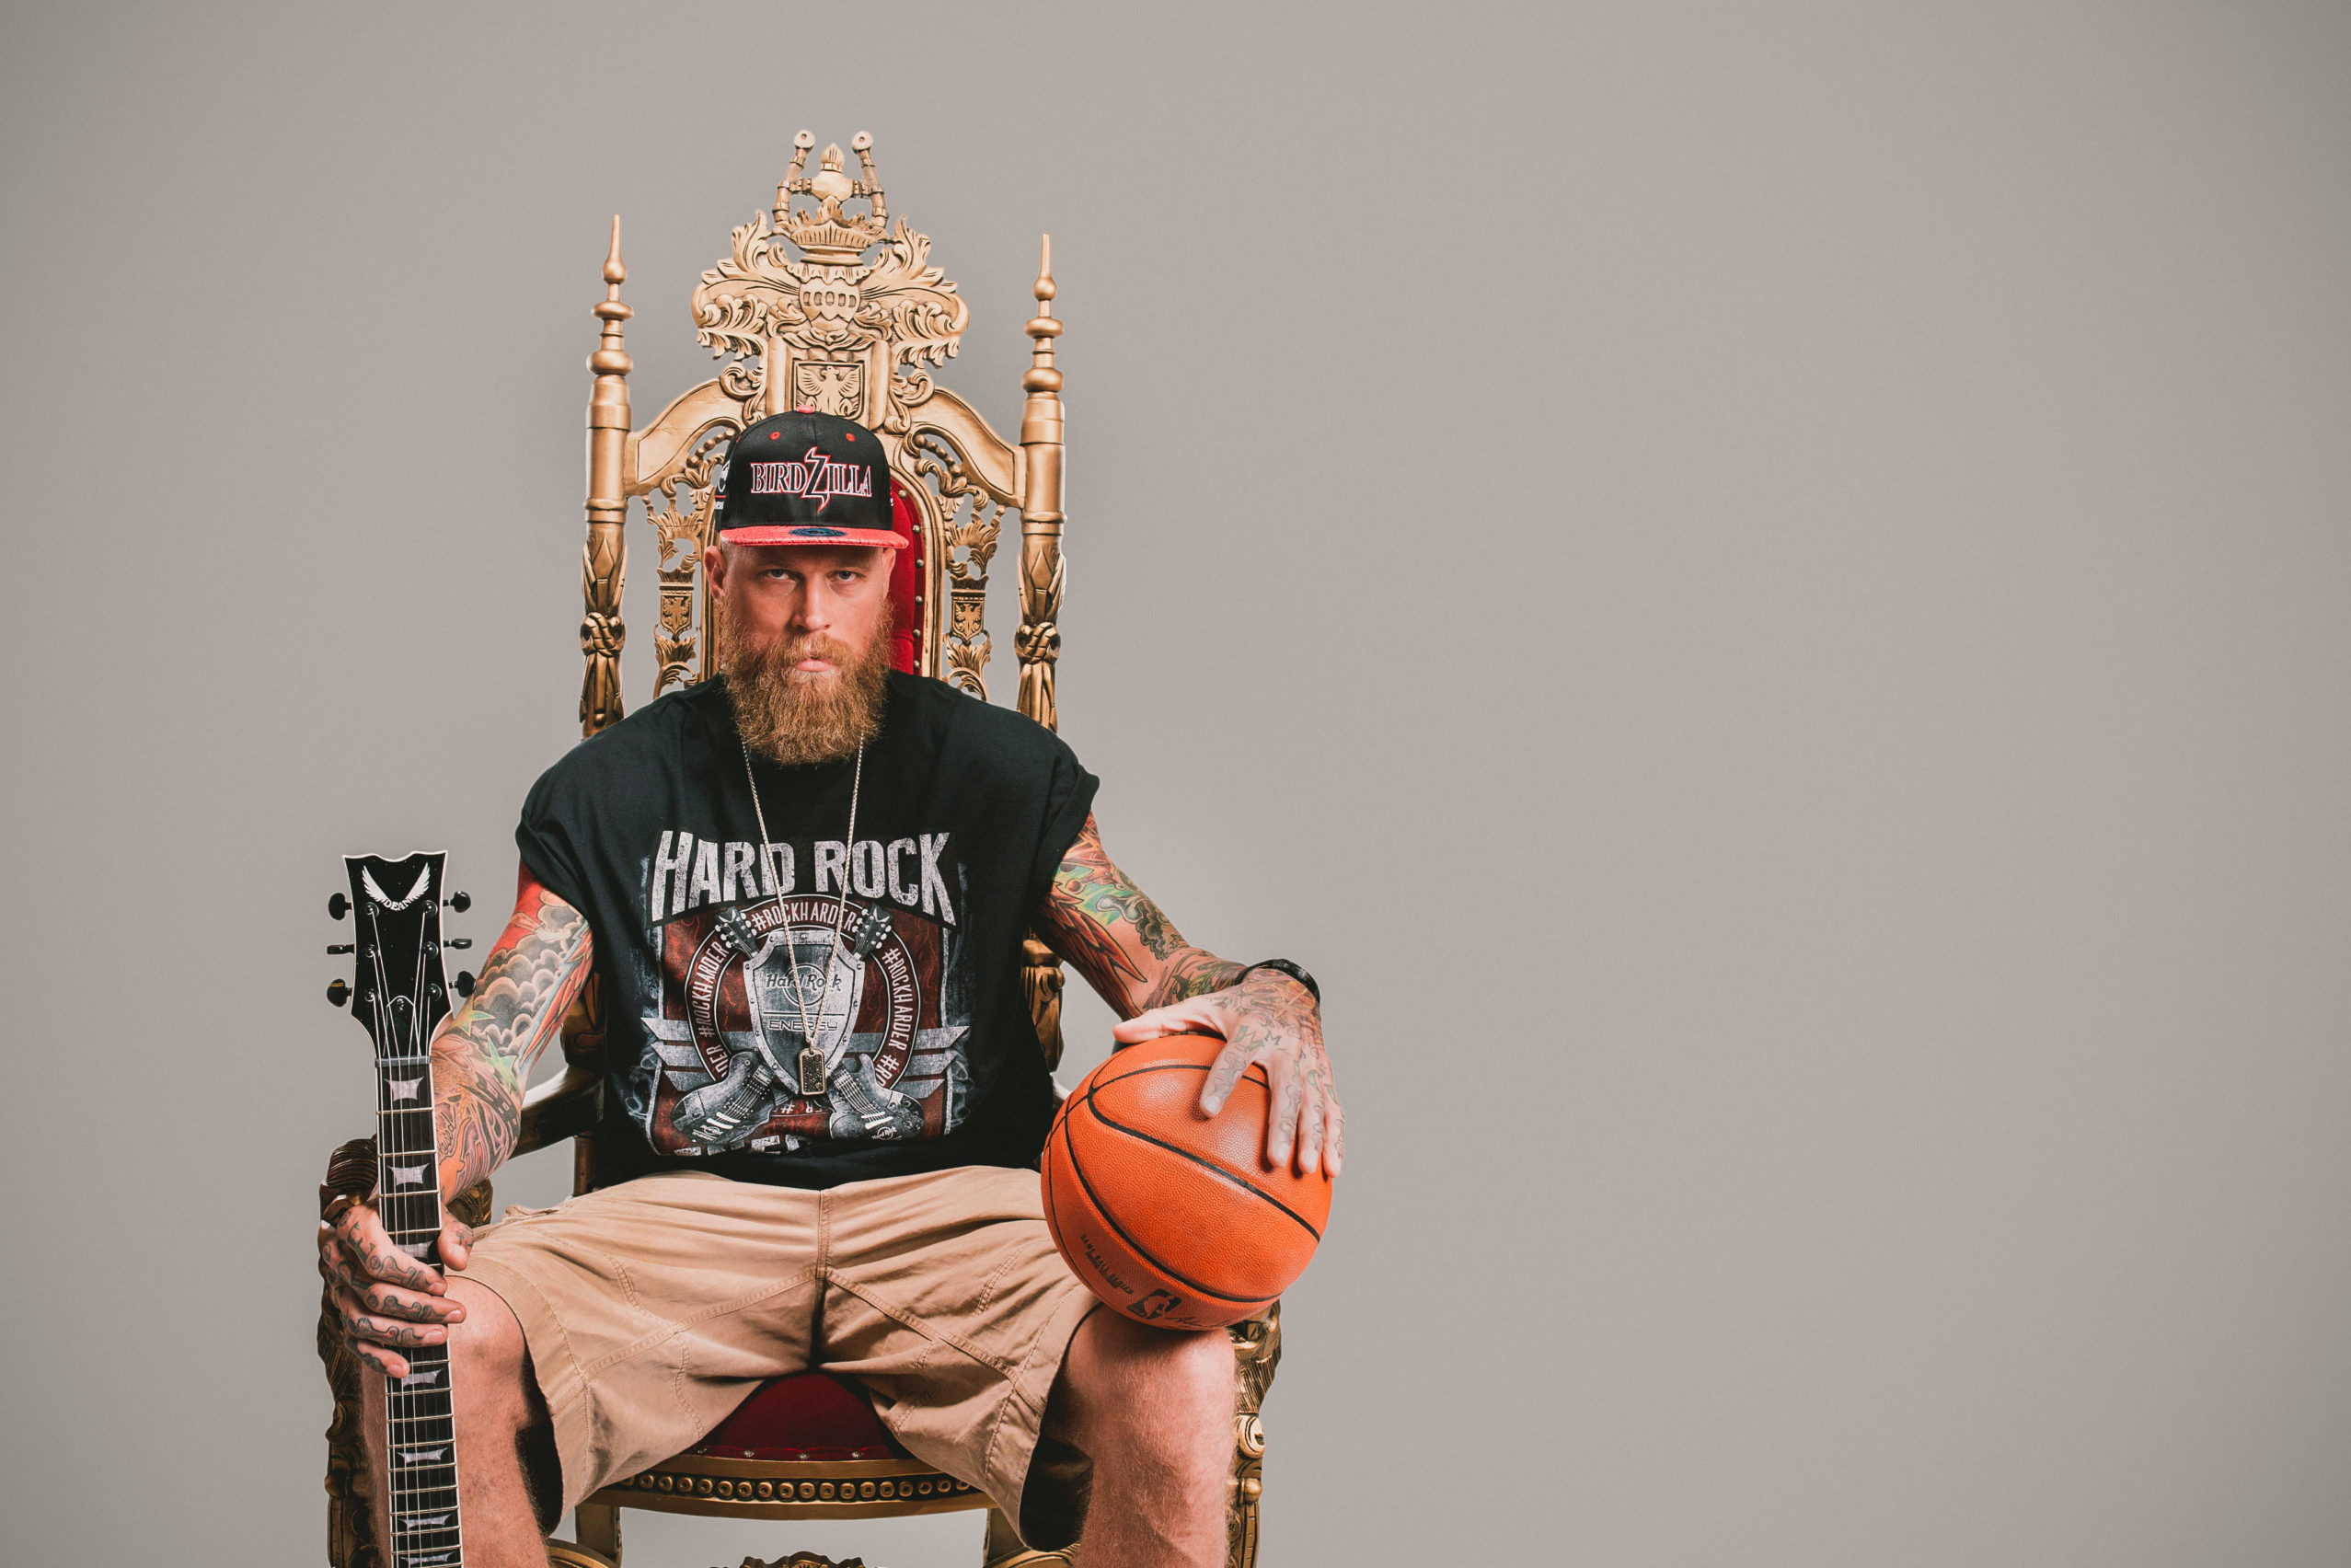 Male model wearing black cap and t shirt sitting on a throne holding a basketball and a guitar